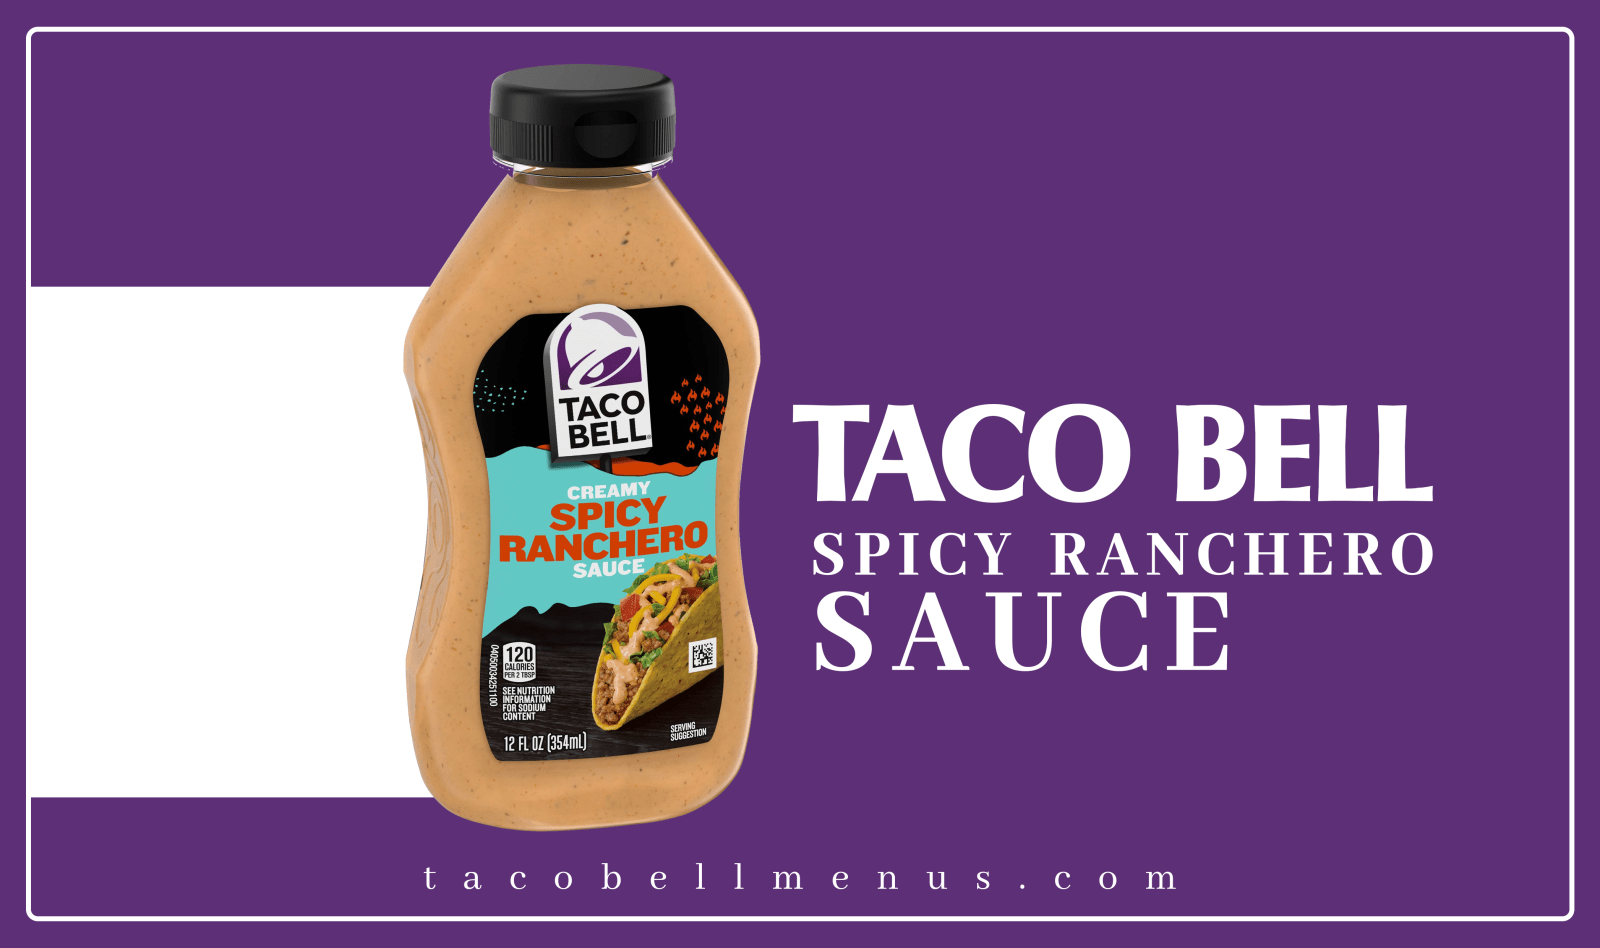 Taco Bell Spicy Ranchero Sauce, Taco Bell Spicy Ranchero Sauce Price, Taco Bell Spicy Ranchero Sauce Nutrition, Taco Bell Spicy Ranchero Sauce Calories, Spicy Ranchero Sauce Recipe, Spicy Ranchero Sauce ingreditents, Spicy Ranchero Sauce Recipe, Spicy Ranchero Sauce 2023